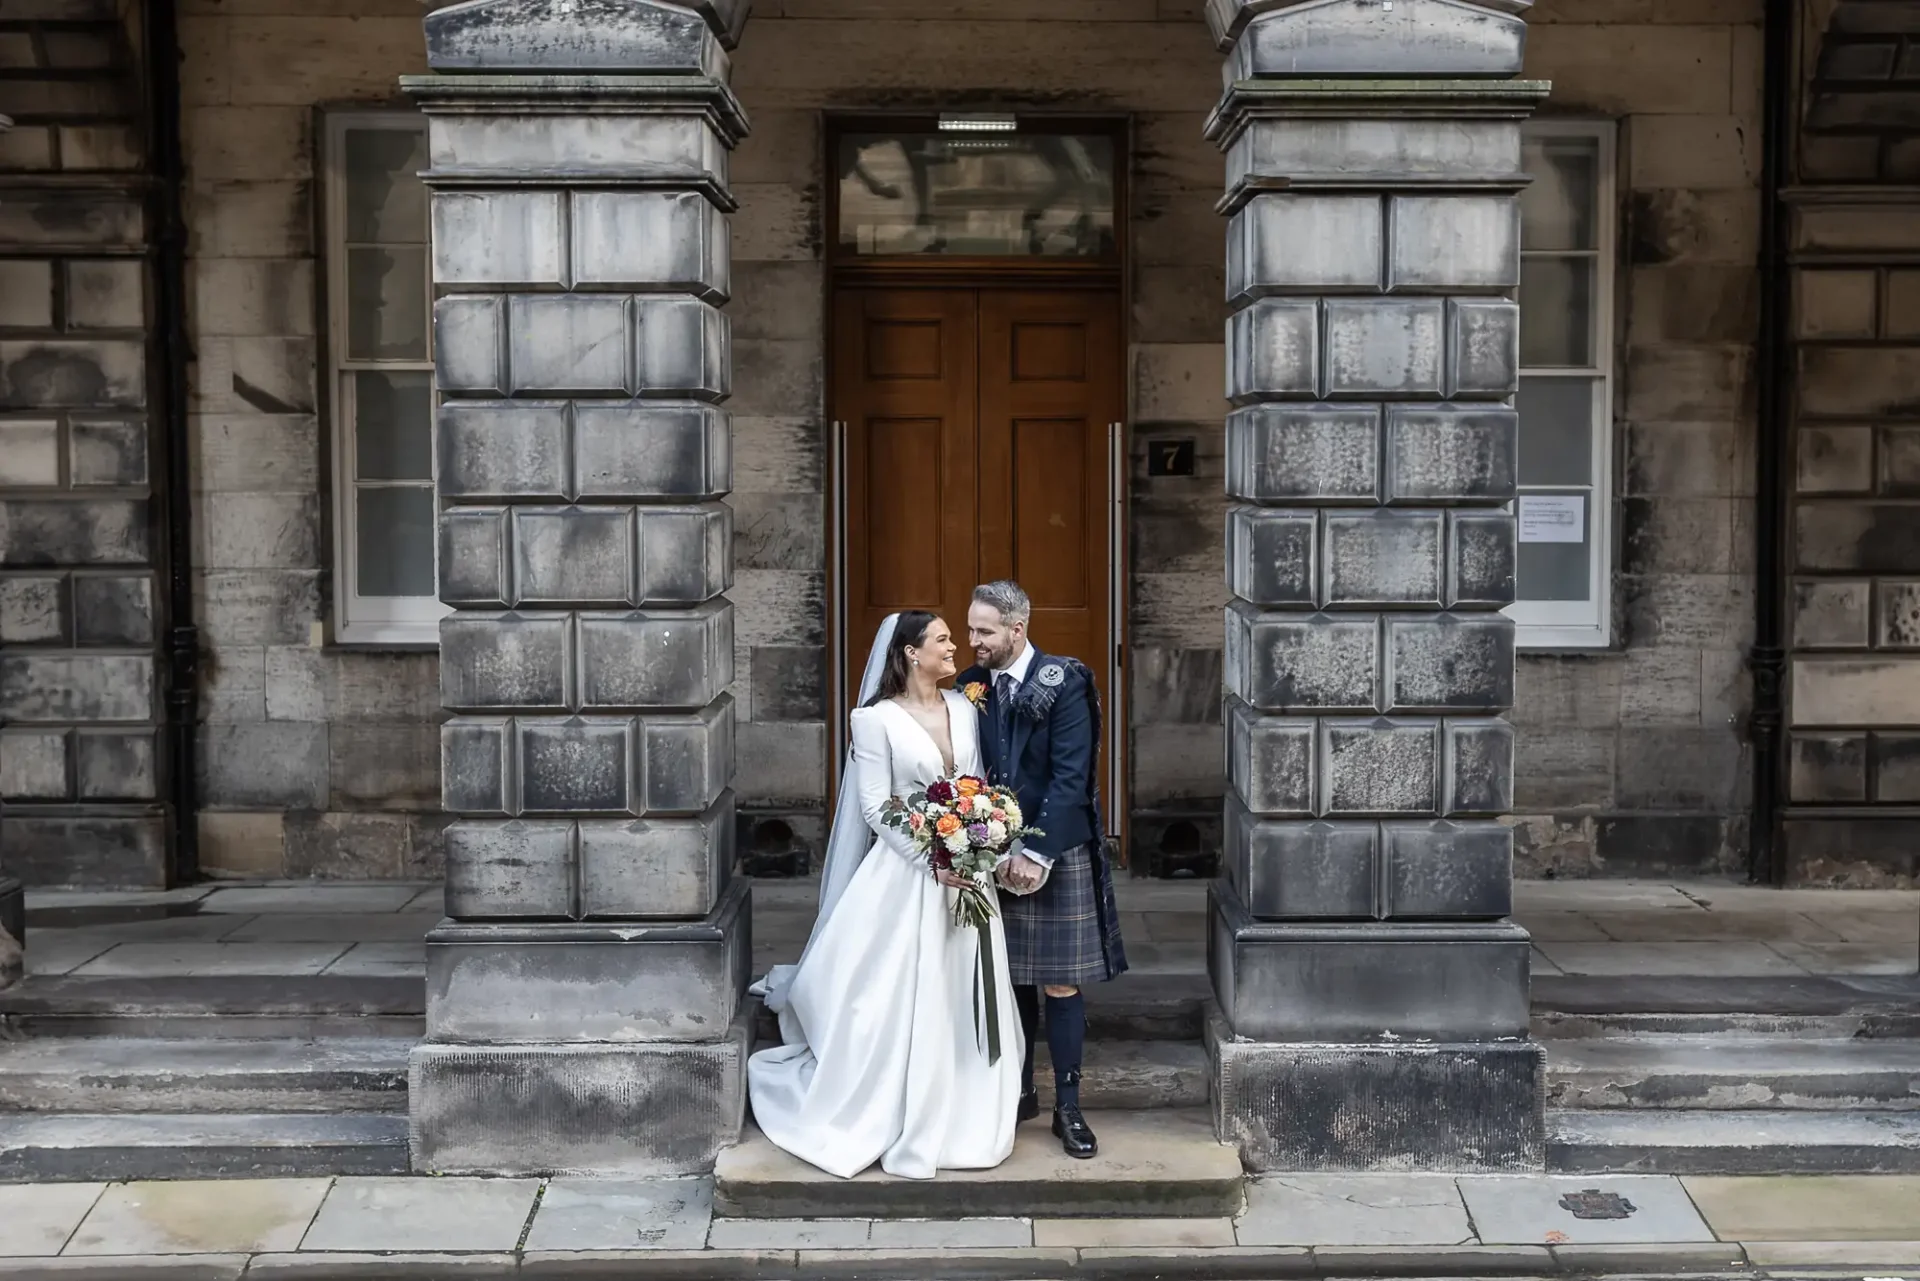 A bride and groom smiling and holding hands in front of a building with large stone columns and a wooden door.